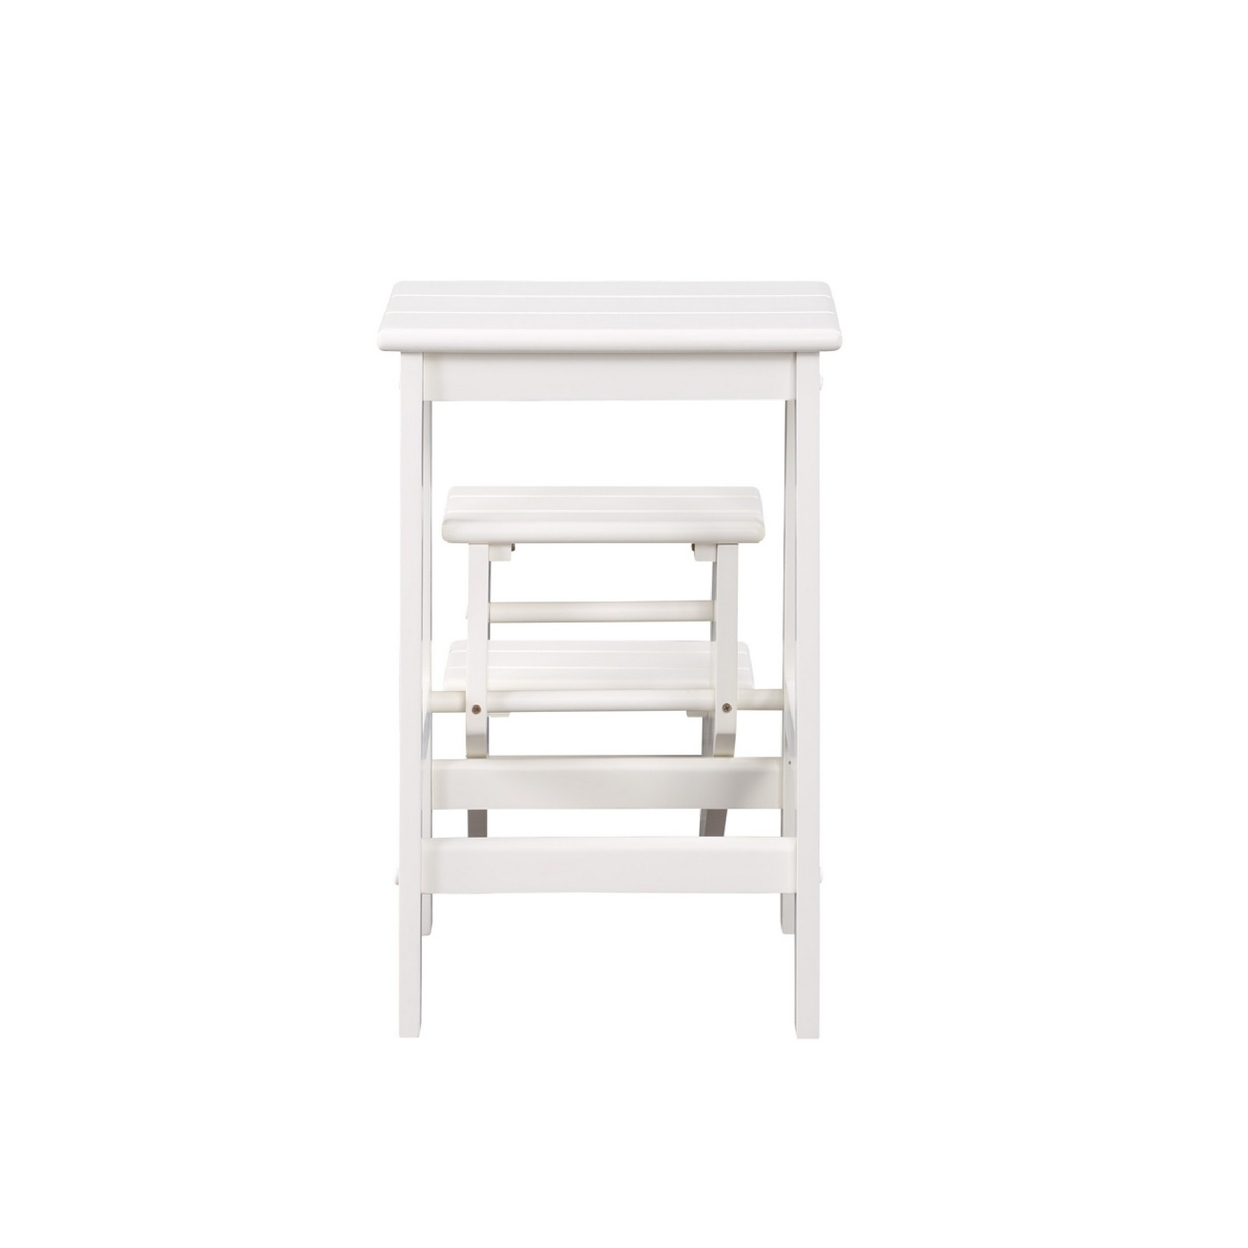 24 Inch 3 Level Step Stool, Plank Tops And Safety Latch, Classic White Wood- Saltoro Sherpi